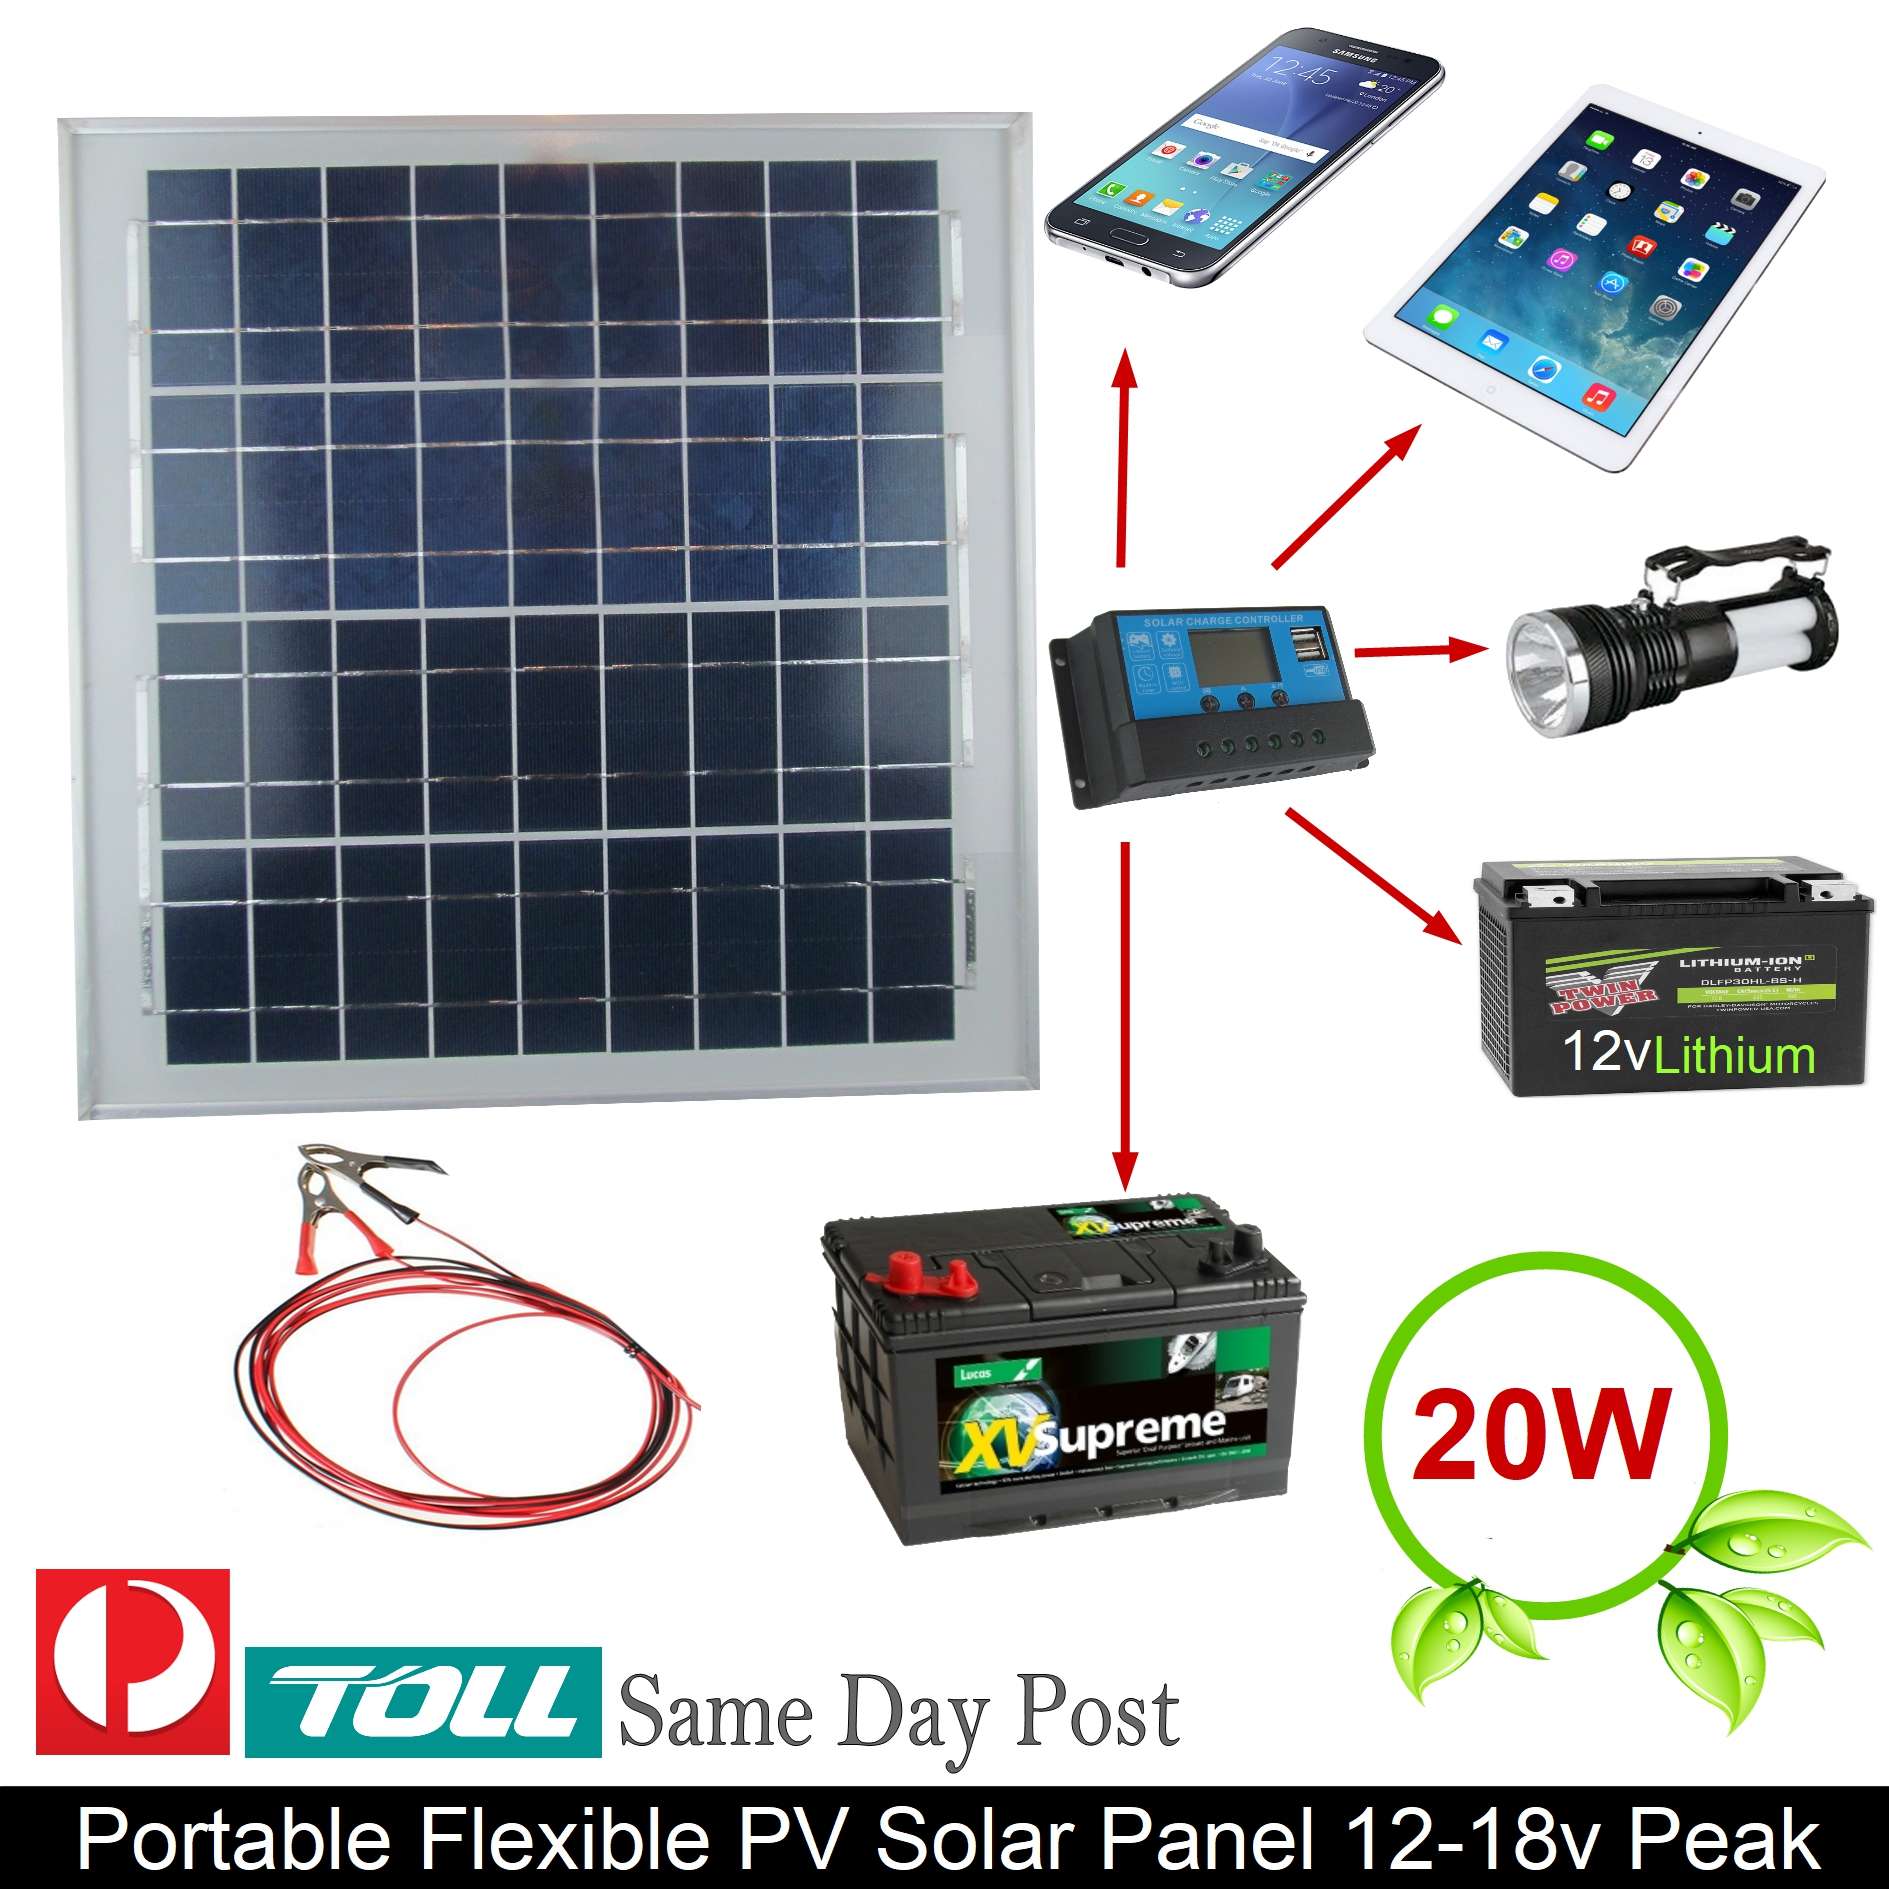 20W 12v SOLAR PANEL CHARGE BATTERY TRICKLE CHARGER KIT + SOLAR CONTROLLER eBay